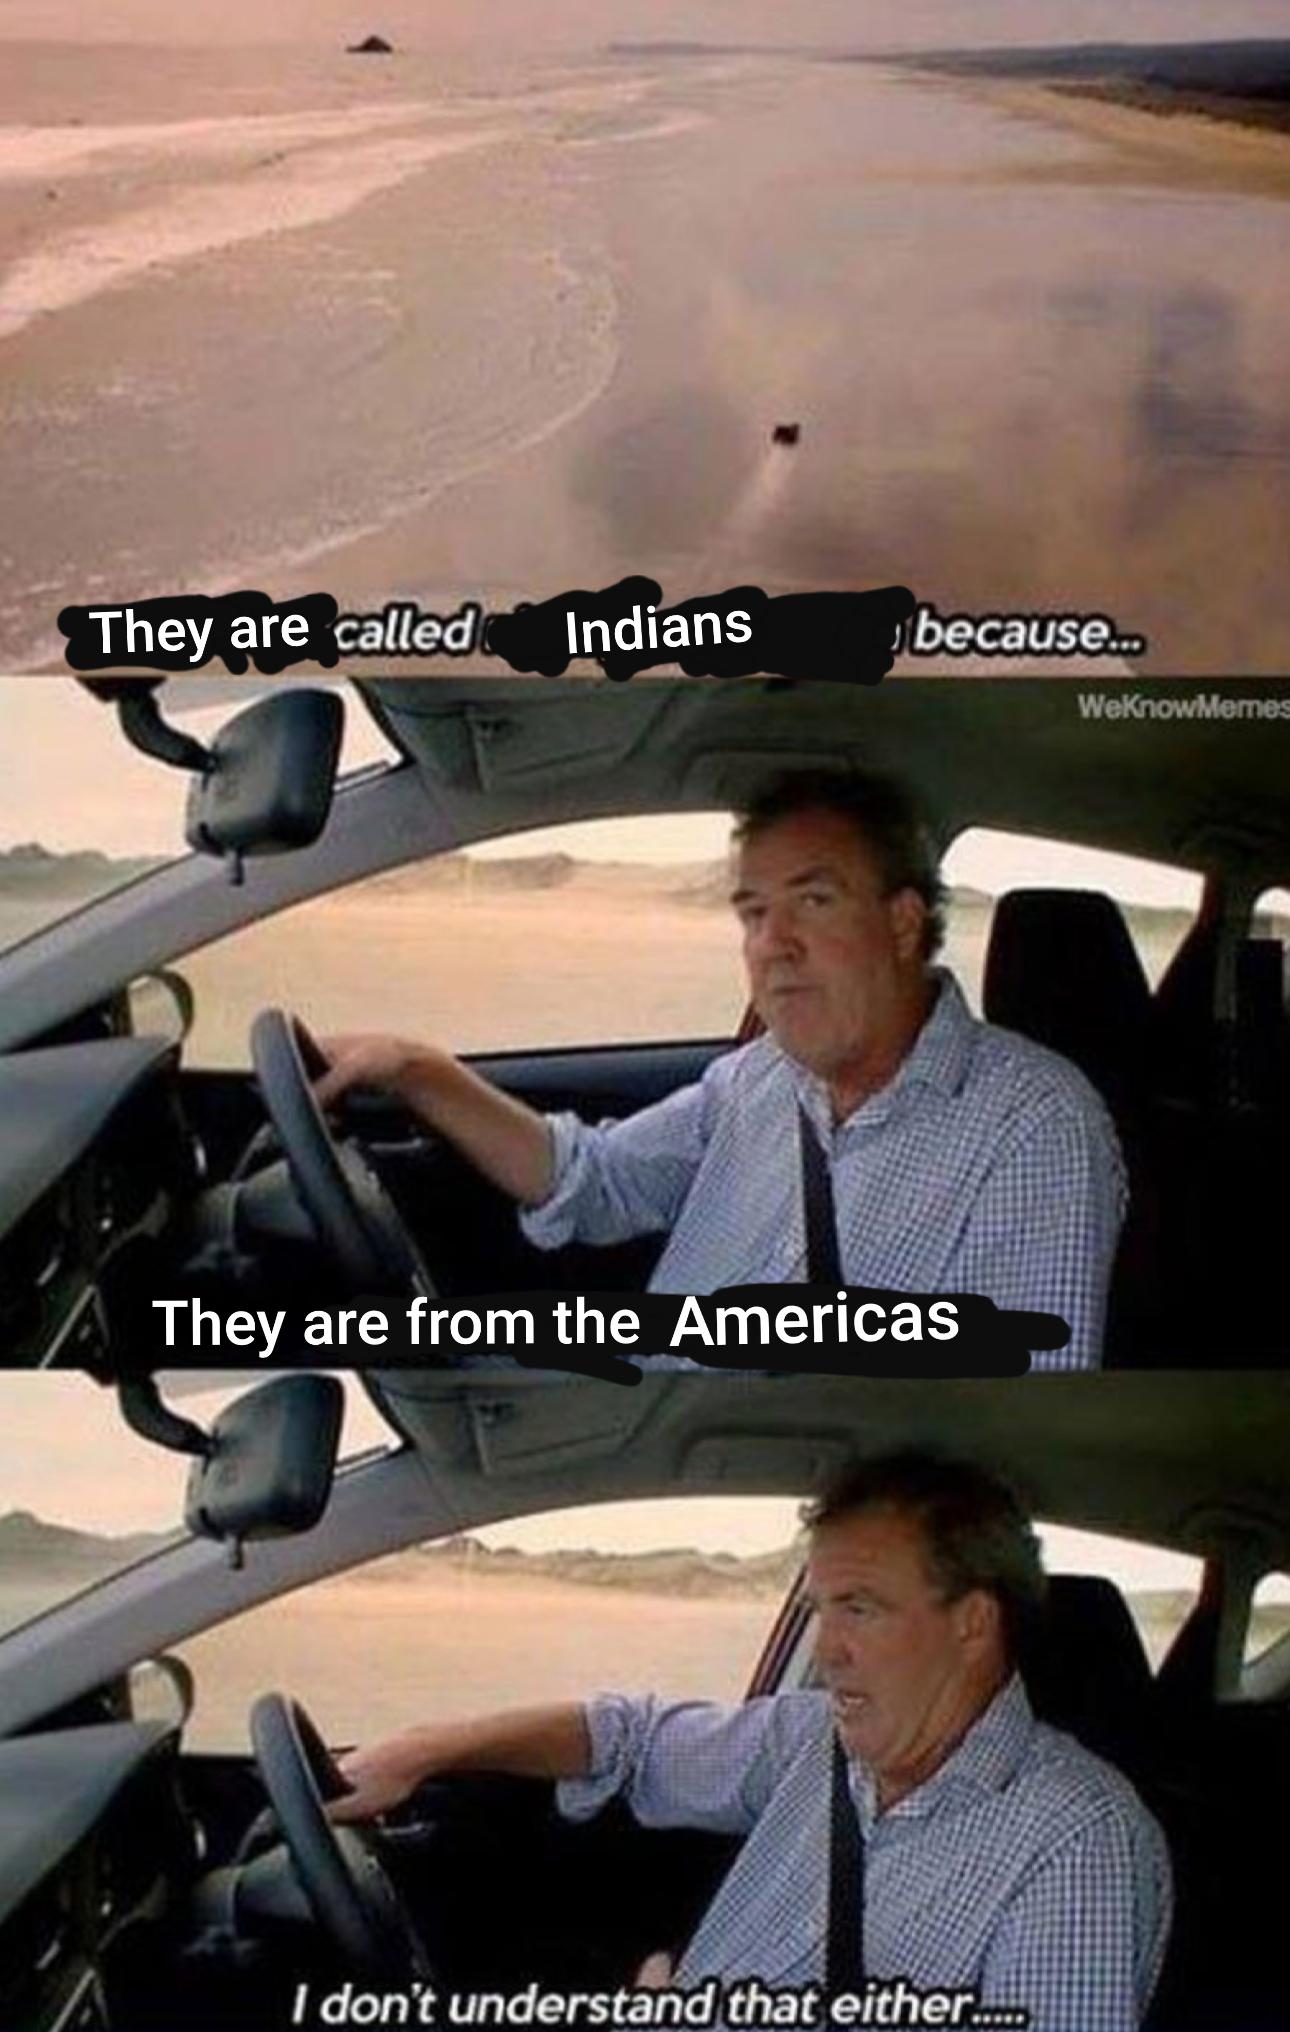 columbus day meme - top gear memes - They are called Indians because... WeKnowMemes A They are from the Americas I don't understand that either.